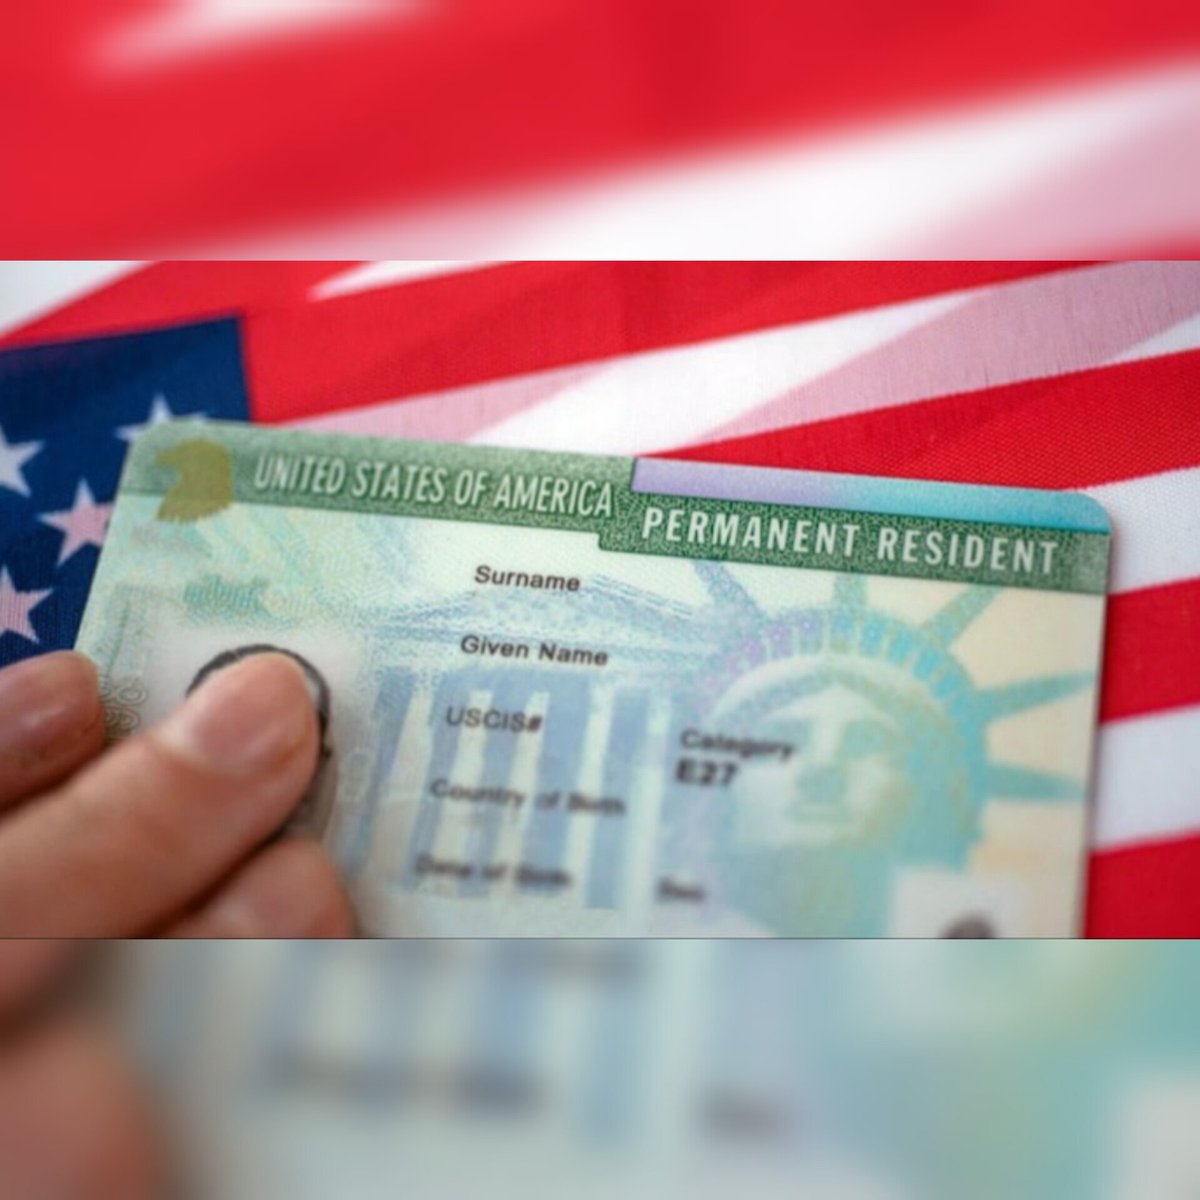 Over 1.2 million Indians face prolonged wait times for US green cards due to backlog in EB-1, EB-2, and EB-3 categories. Urgent reforms needed to address disproportionate impact.

Read more on shorts91.com/category/india…

#USImmigration #GreenCardBacklog #Indian #US #GreenCard